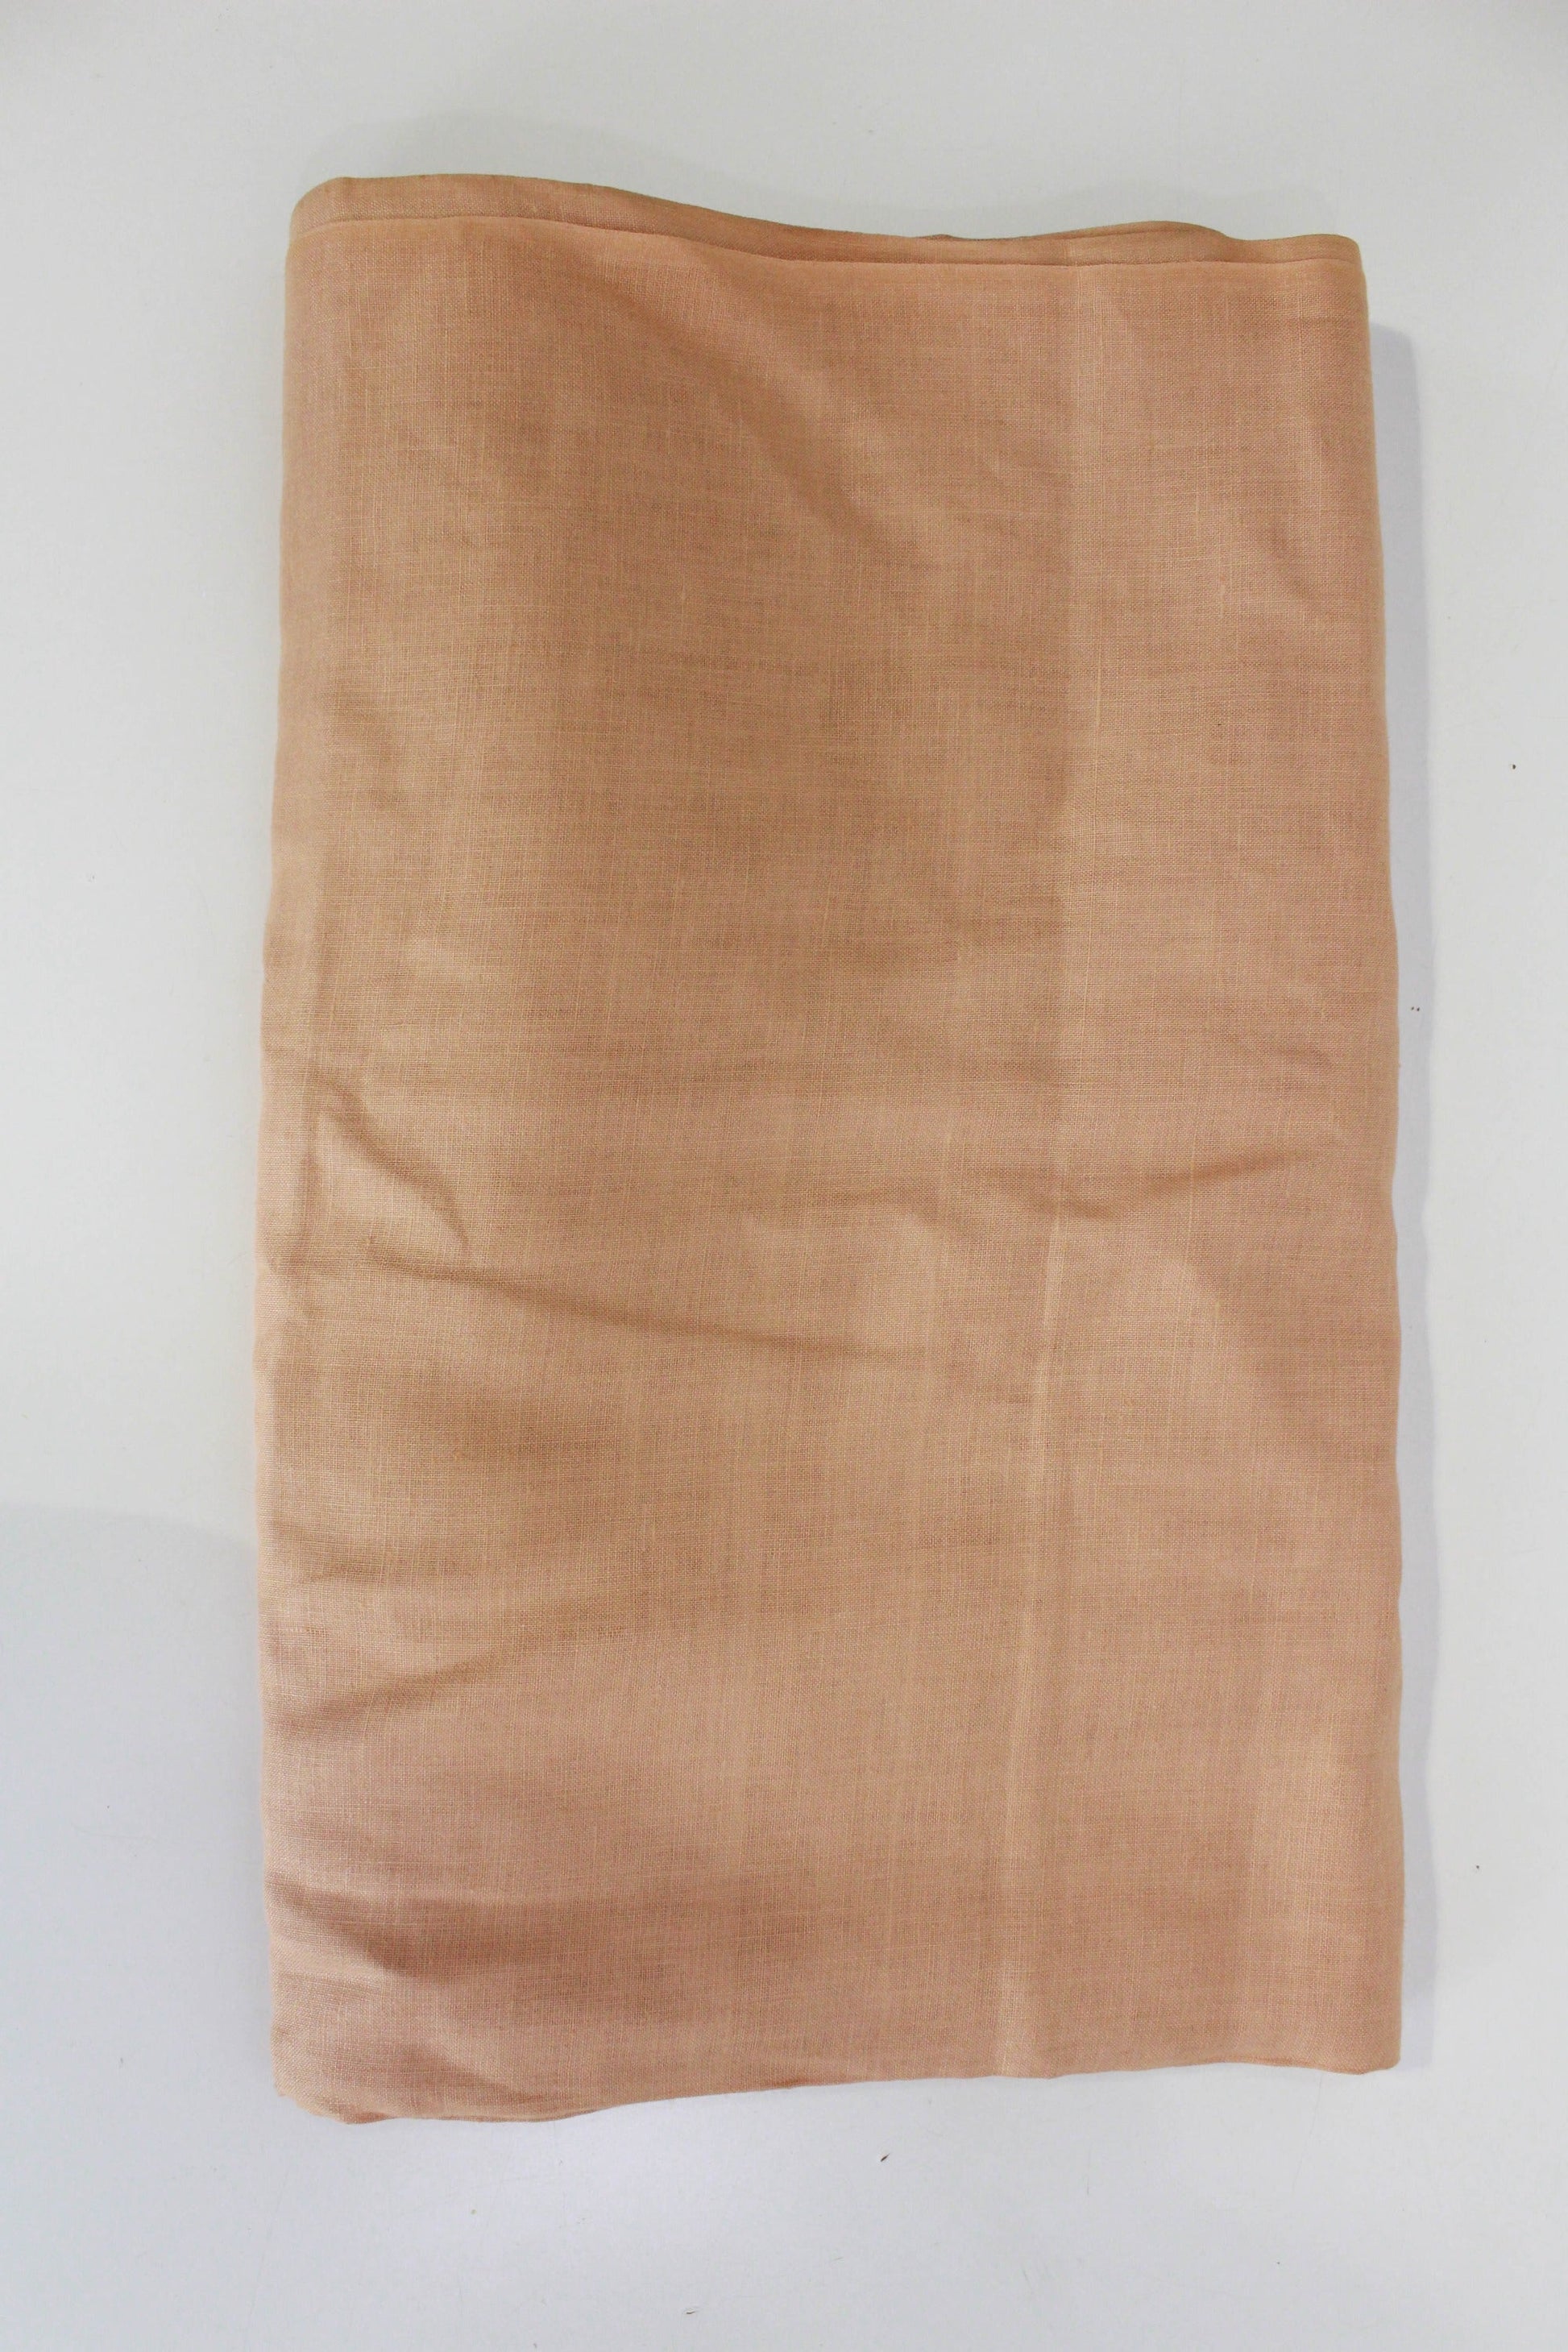 1950s peach linen sewing fabric vintage pure linen